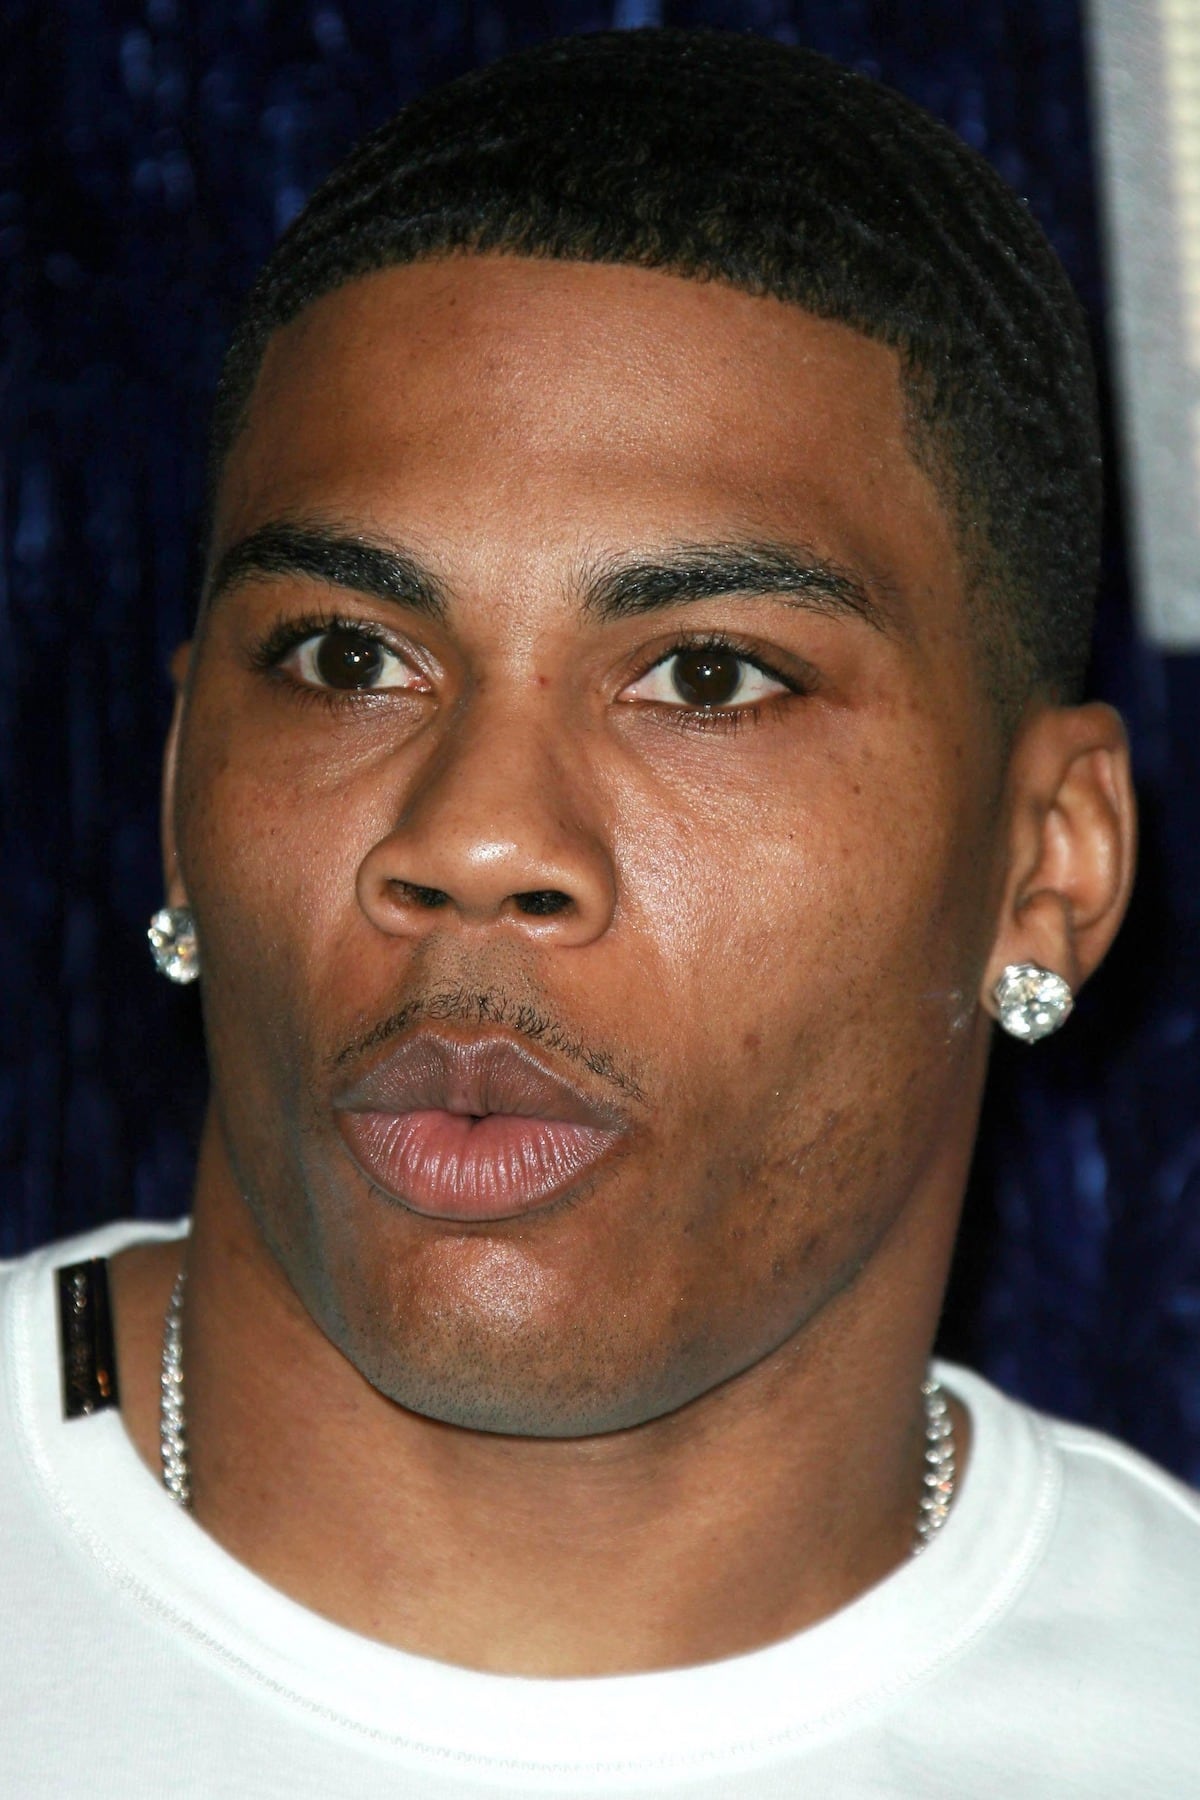 Nelly Issues Apology For Leaked Video, Fans React On Twitter